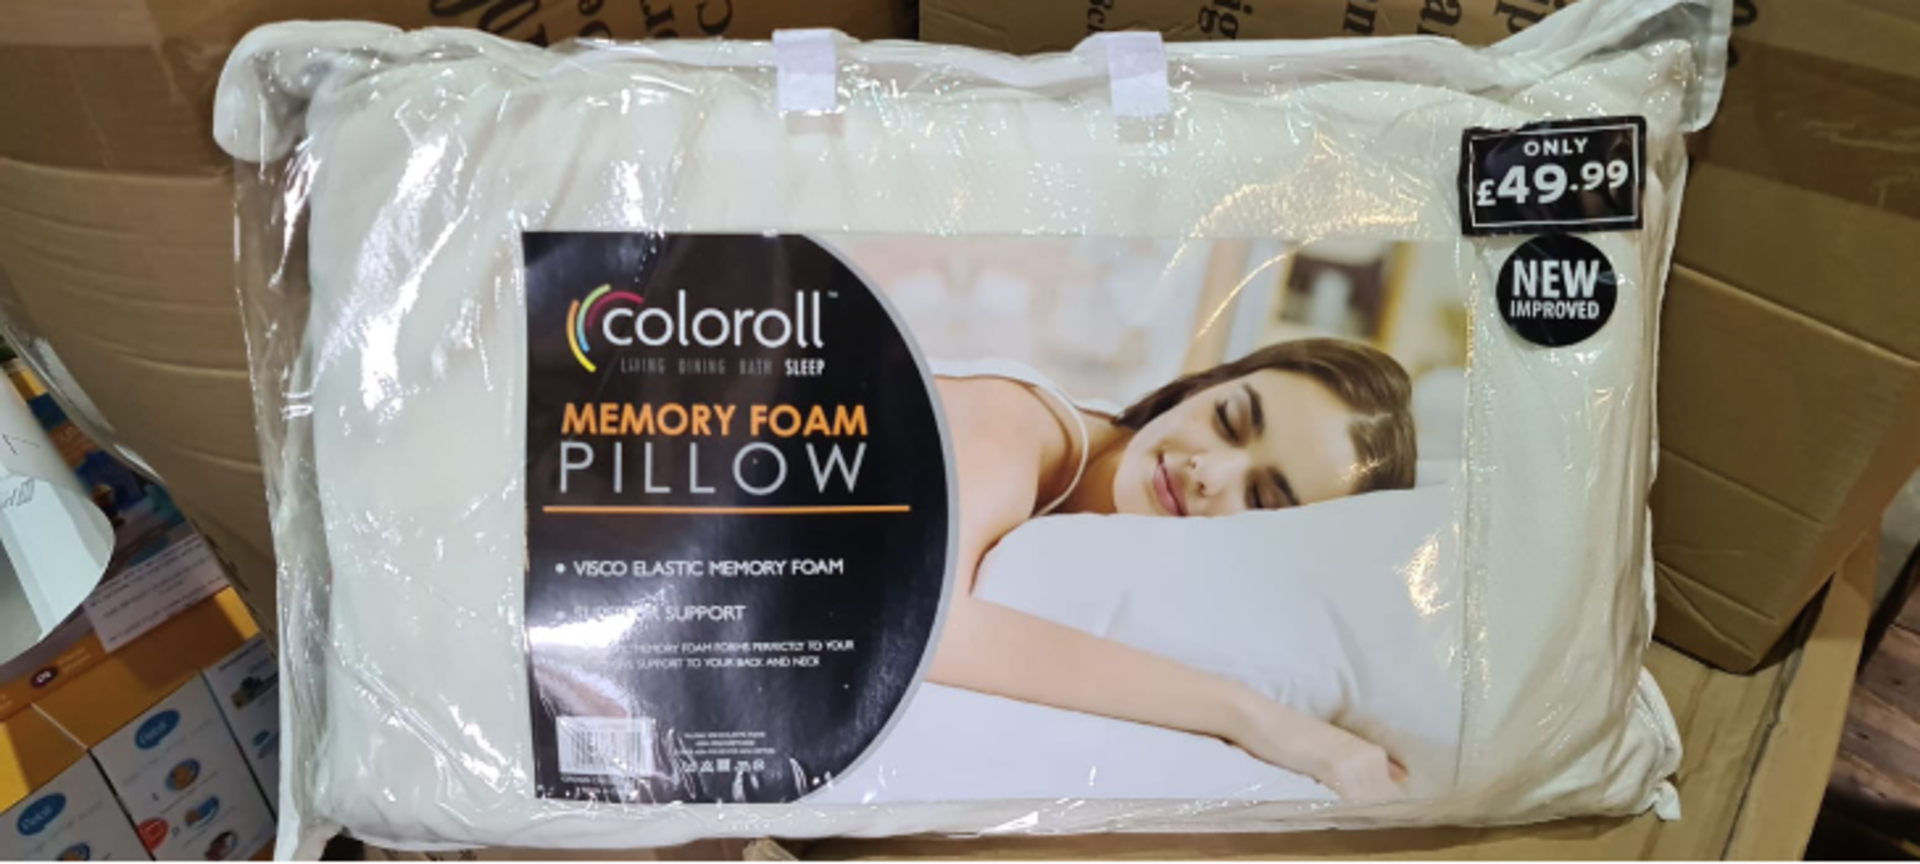 PALLET CONTAINING 70 COLOROLL MEMORY FOAM PILLOWS. PRICE MARKED AT £49.99 EACH. NOTE: